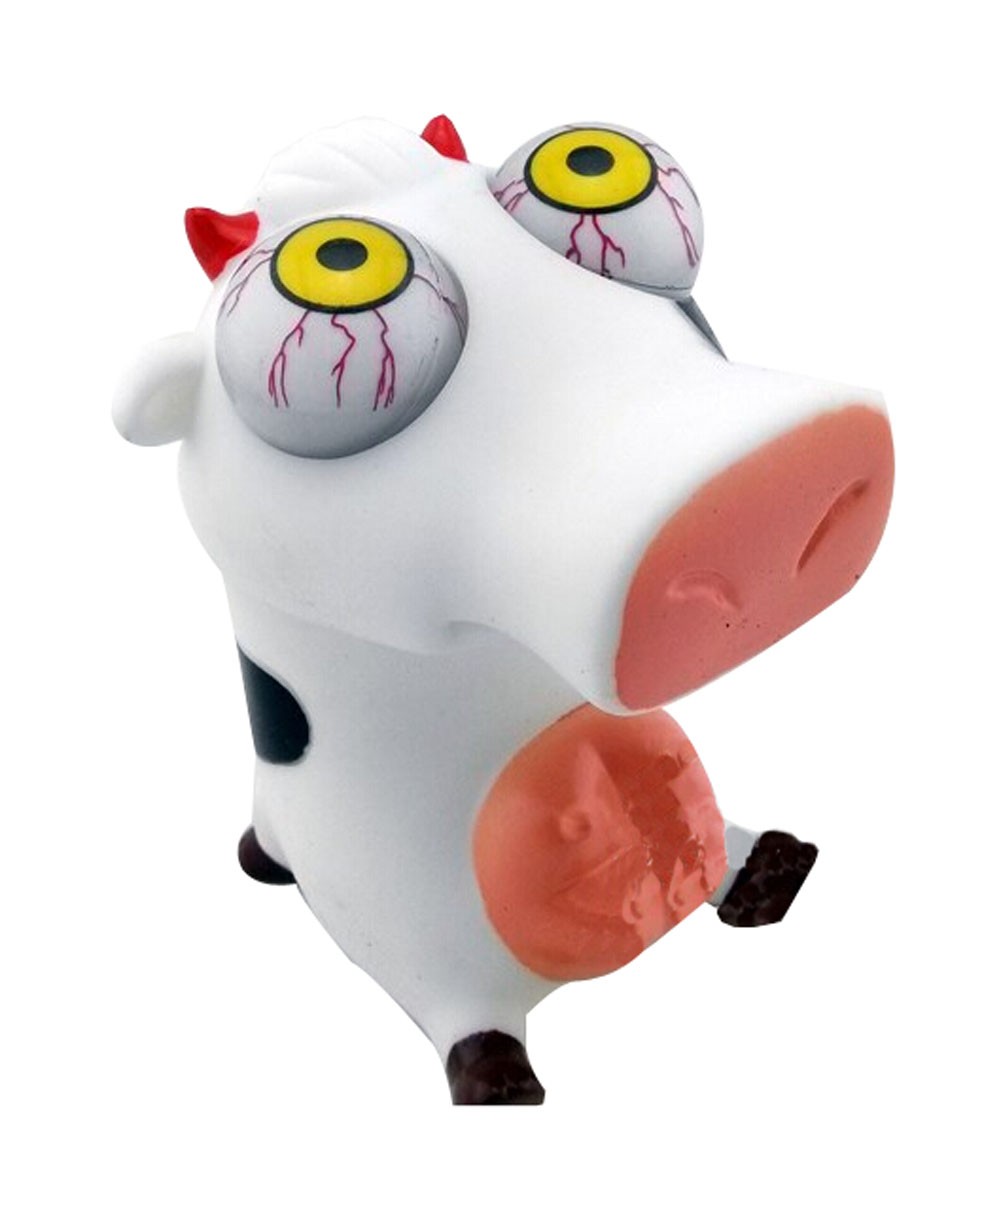 Creative Trick-playing Toys Children Birthday Gifts Cow, 4.5''